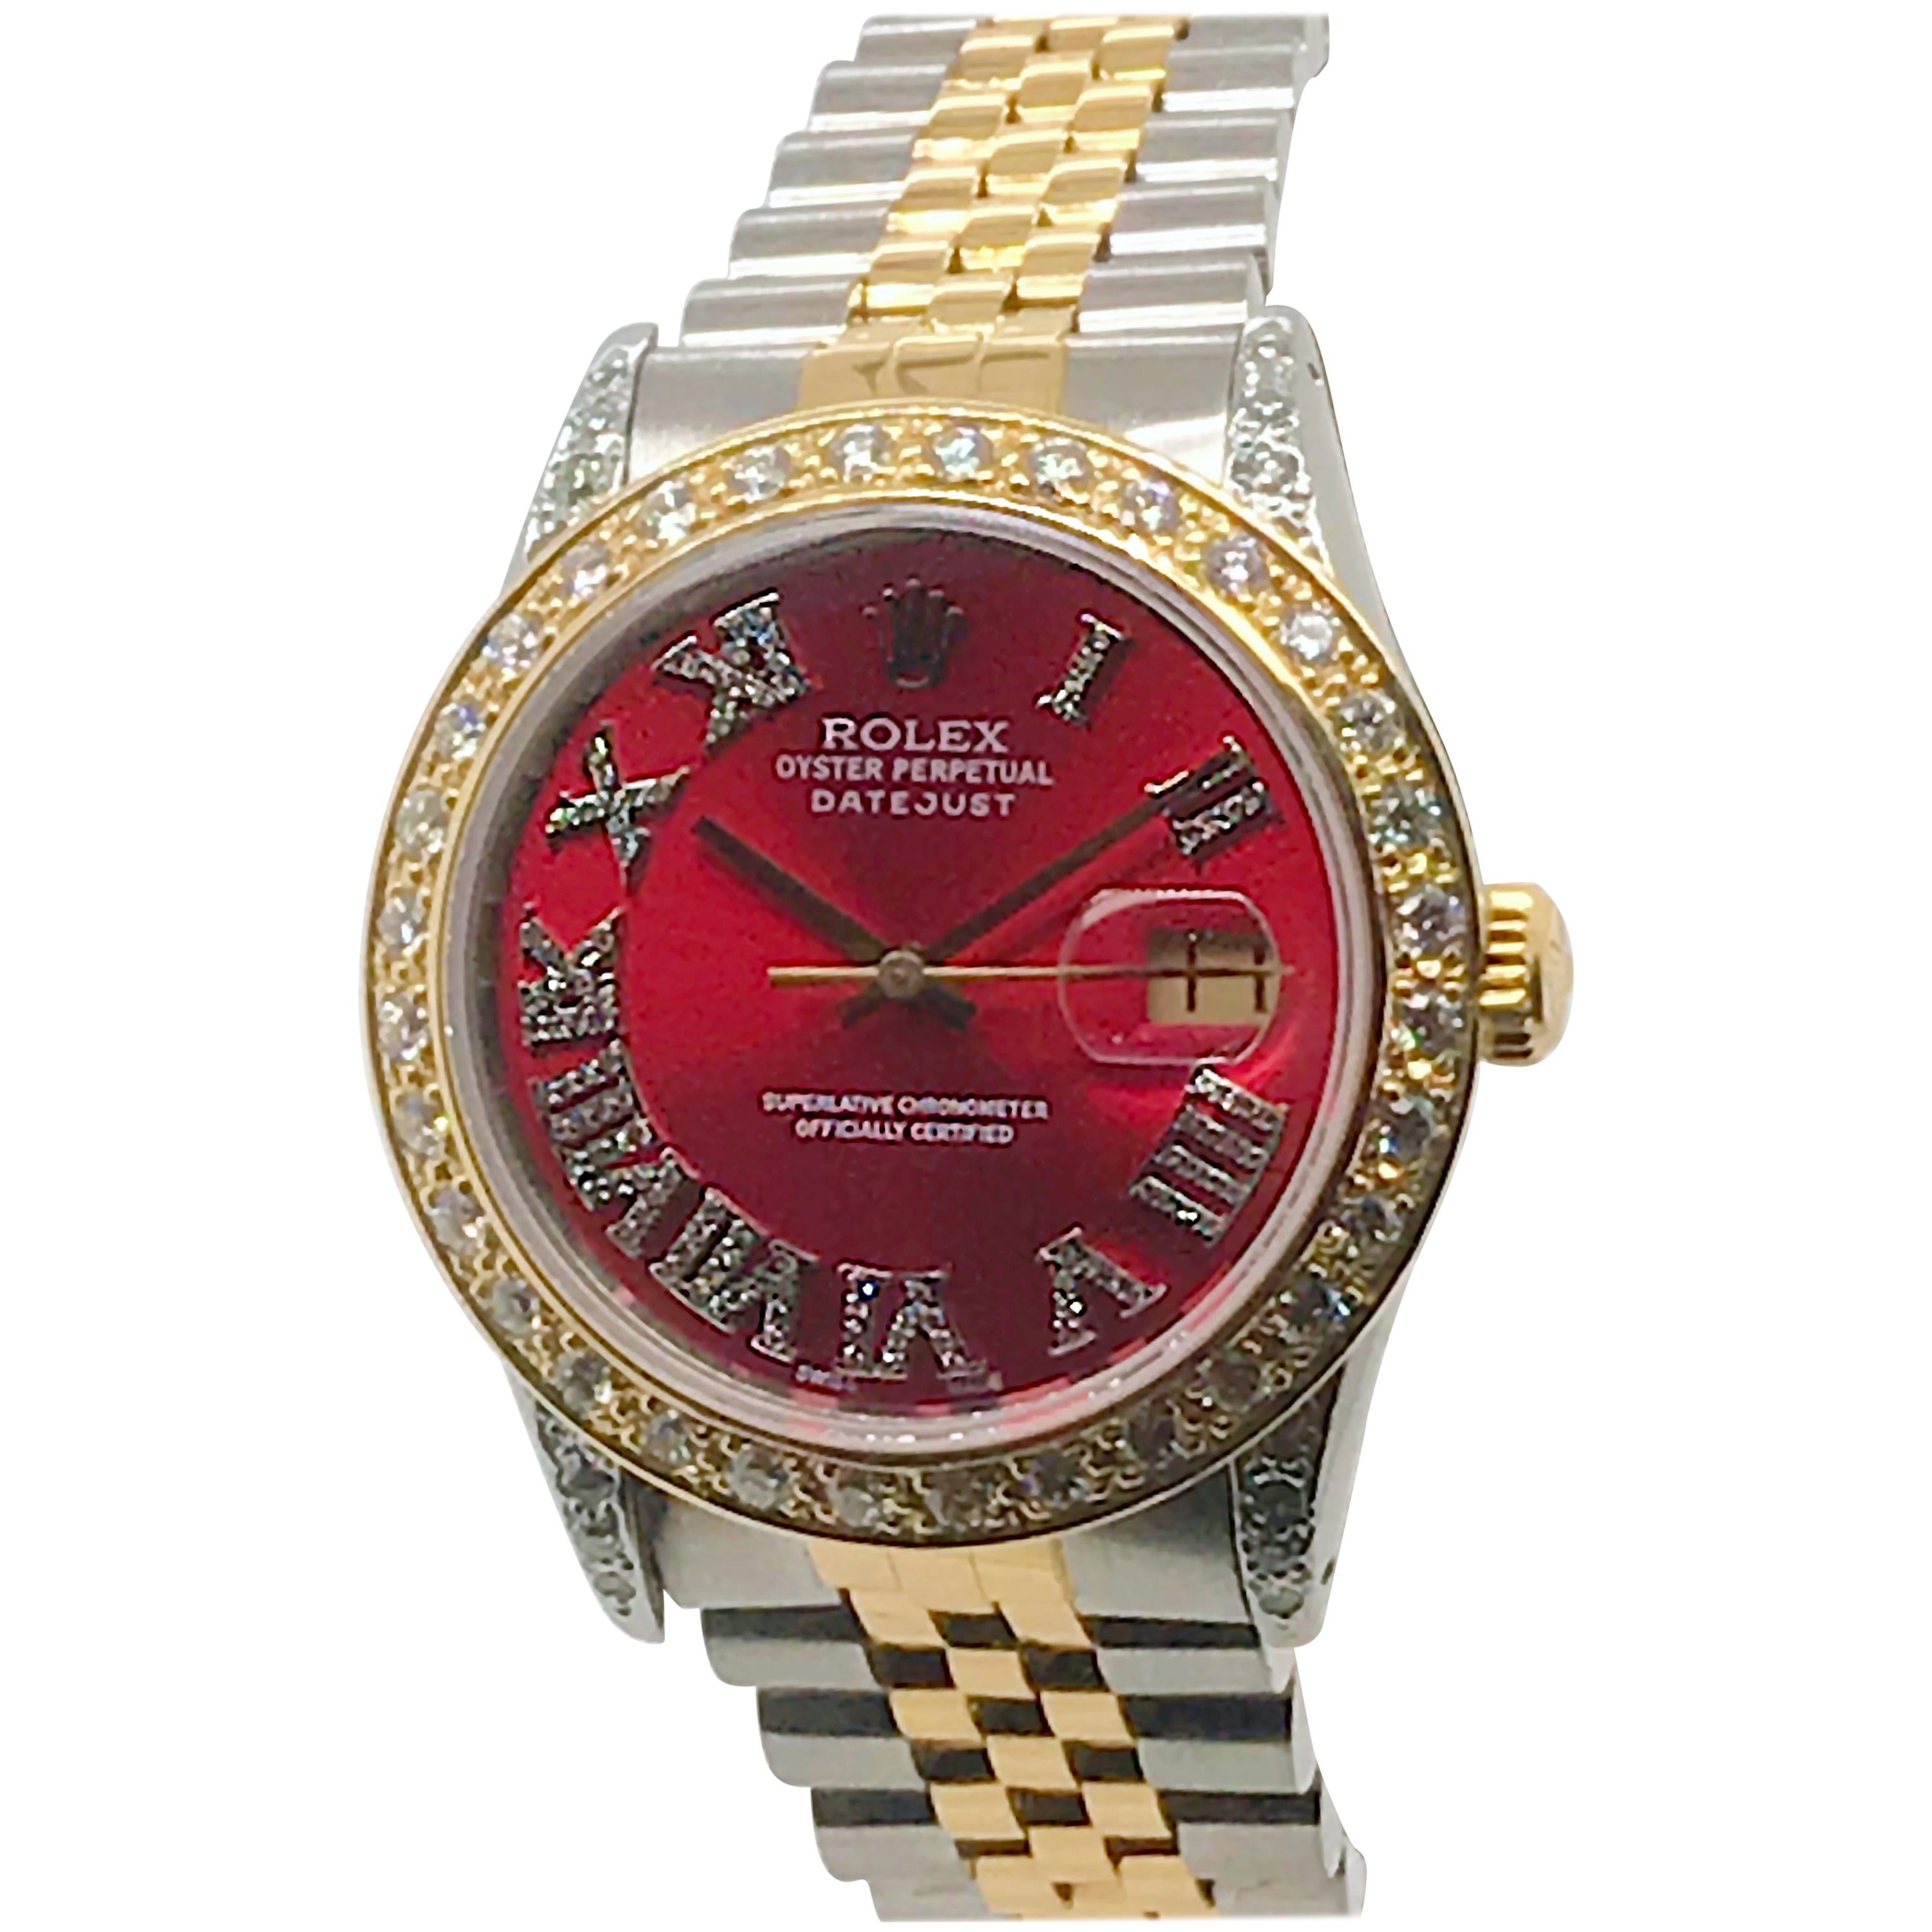 18kt/Stainless Rolex Datejust with Red Diamond Dial, Bezel, and Lugs circa 1985